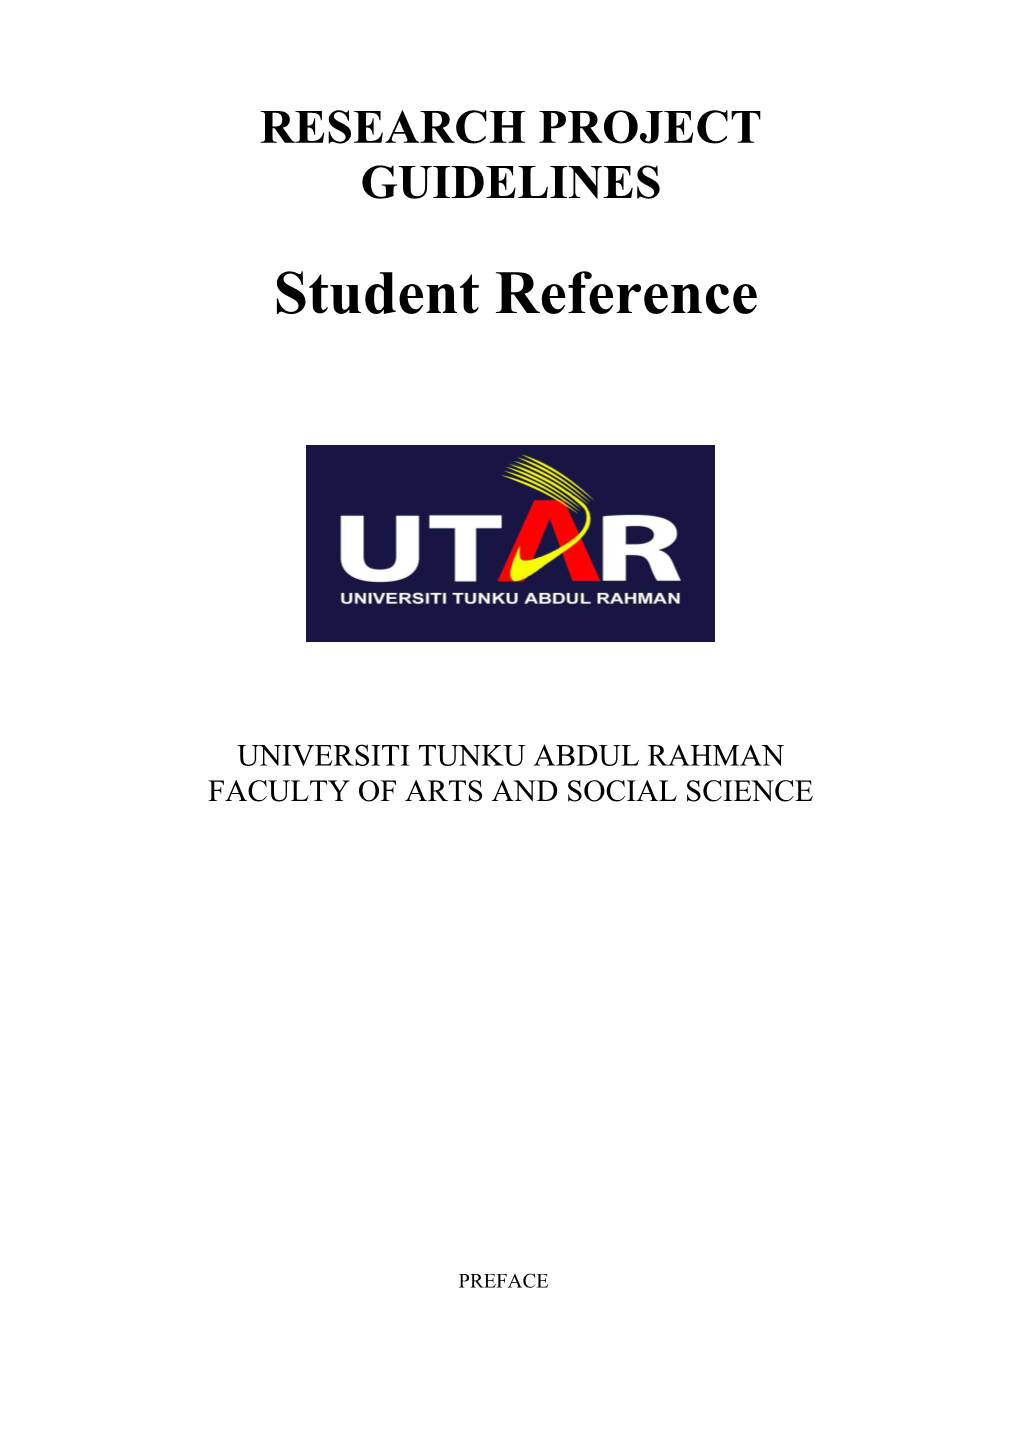 Guide to the Preparation of Uapz 3014 (Student Research Project in Psychology) Research Paper